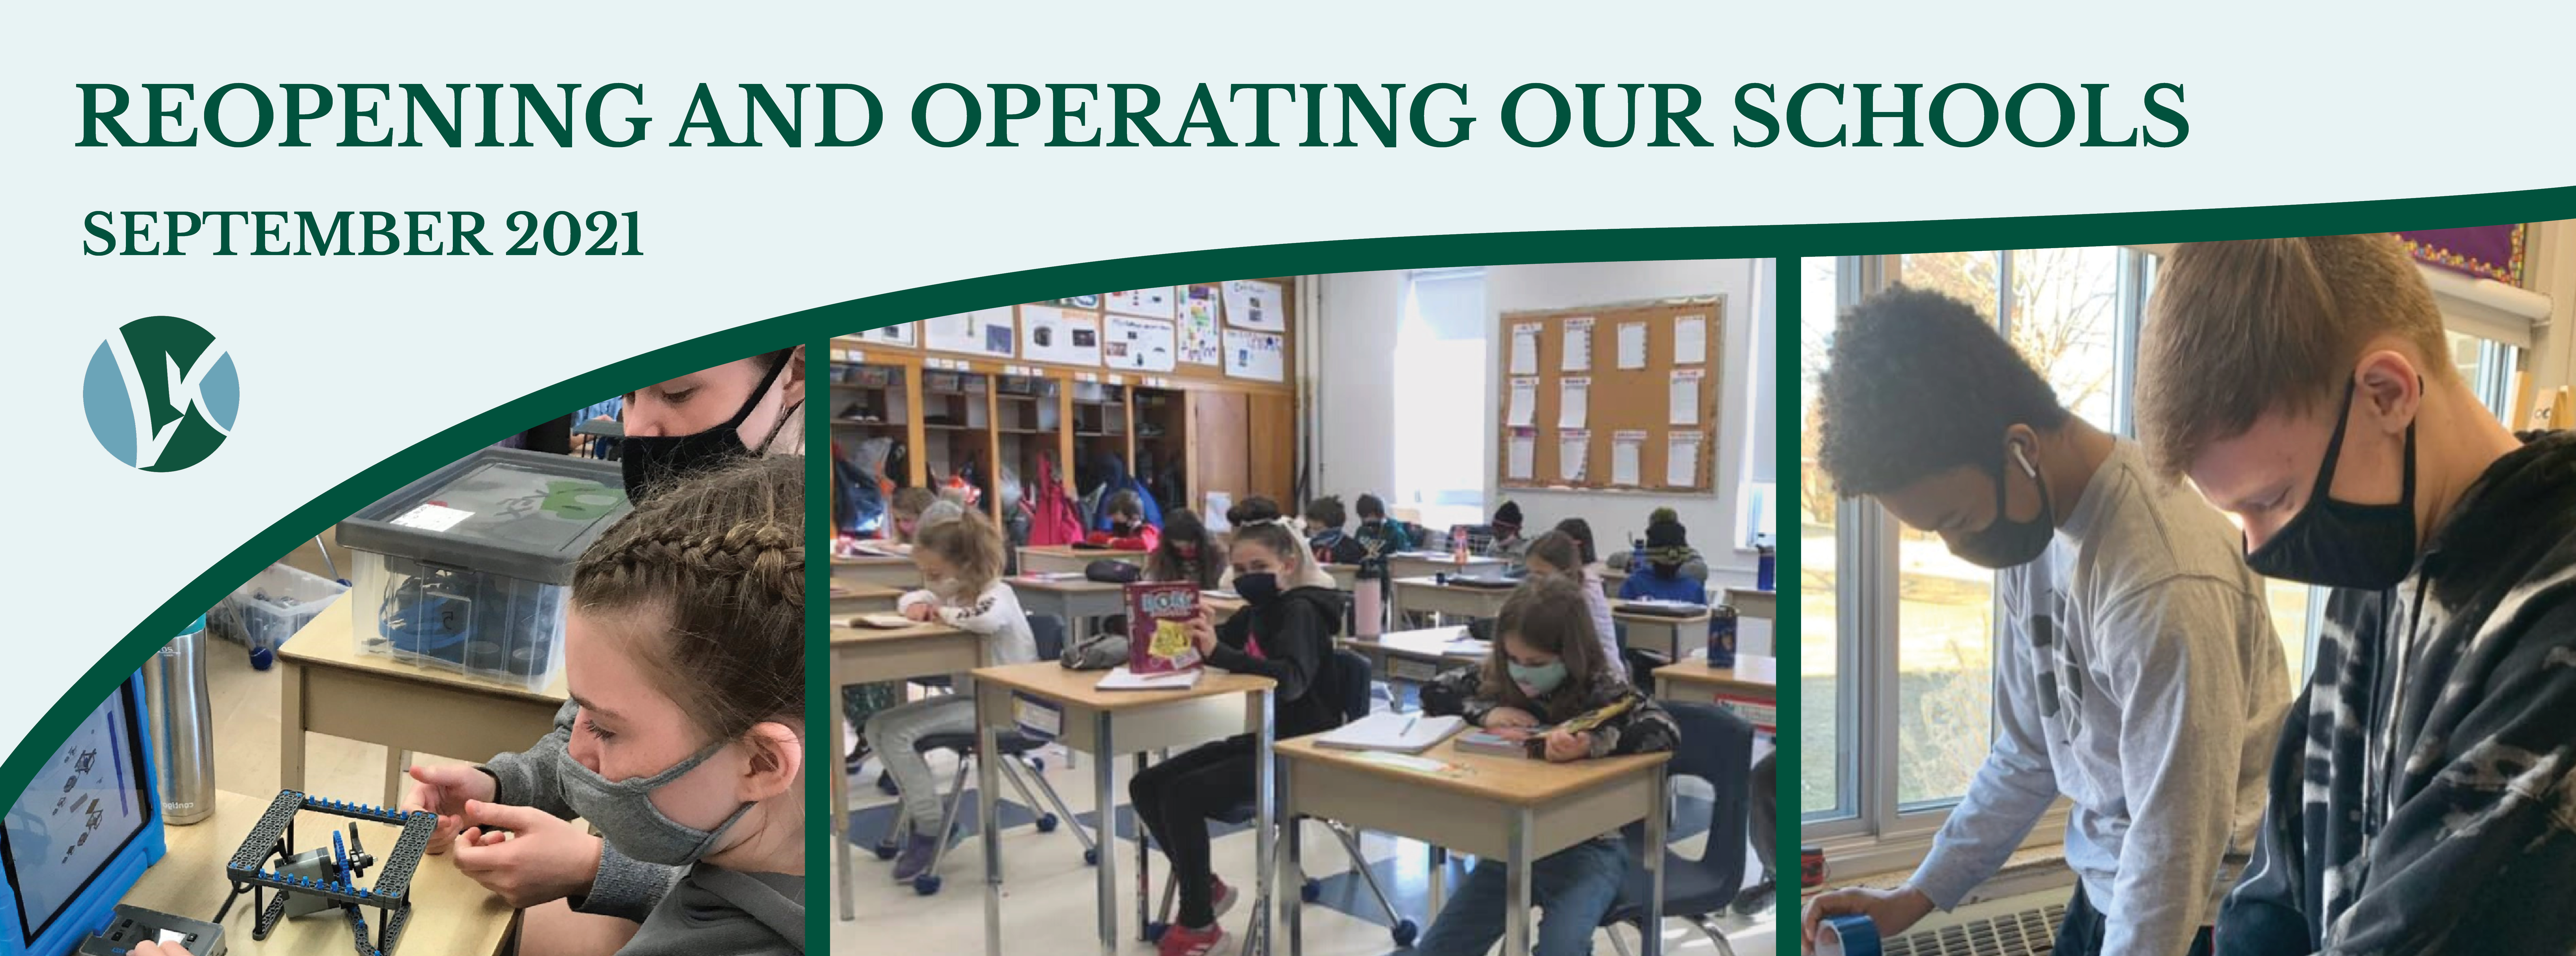 Reopening_and_Operating_Our_Schools-website banner.png